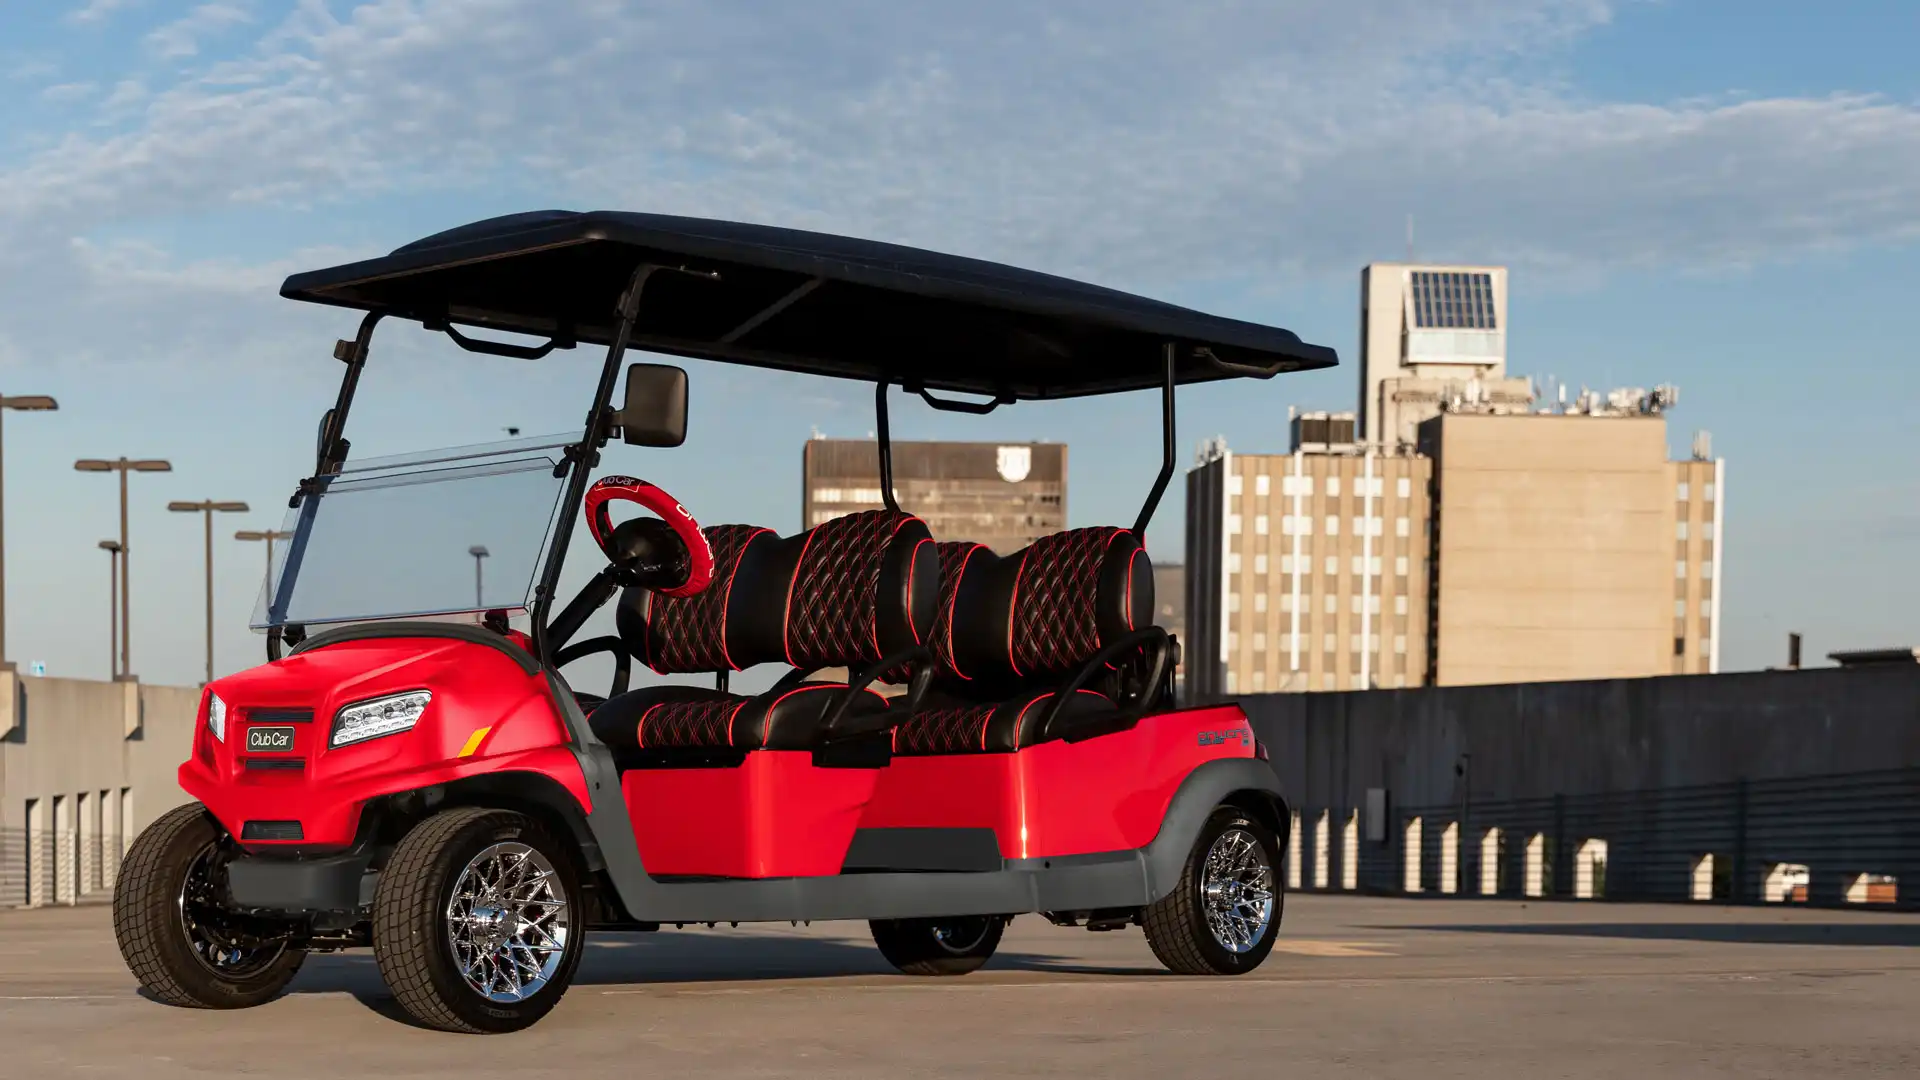 Onward Limited Edition Blazing Comeback red lifted golf carts